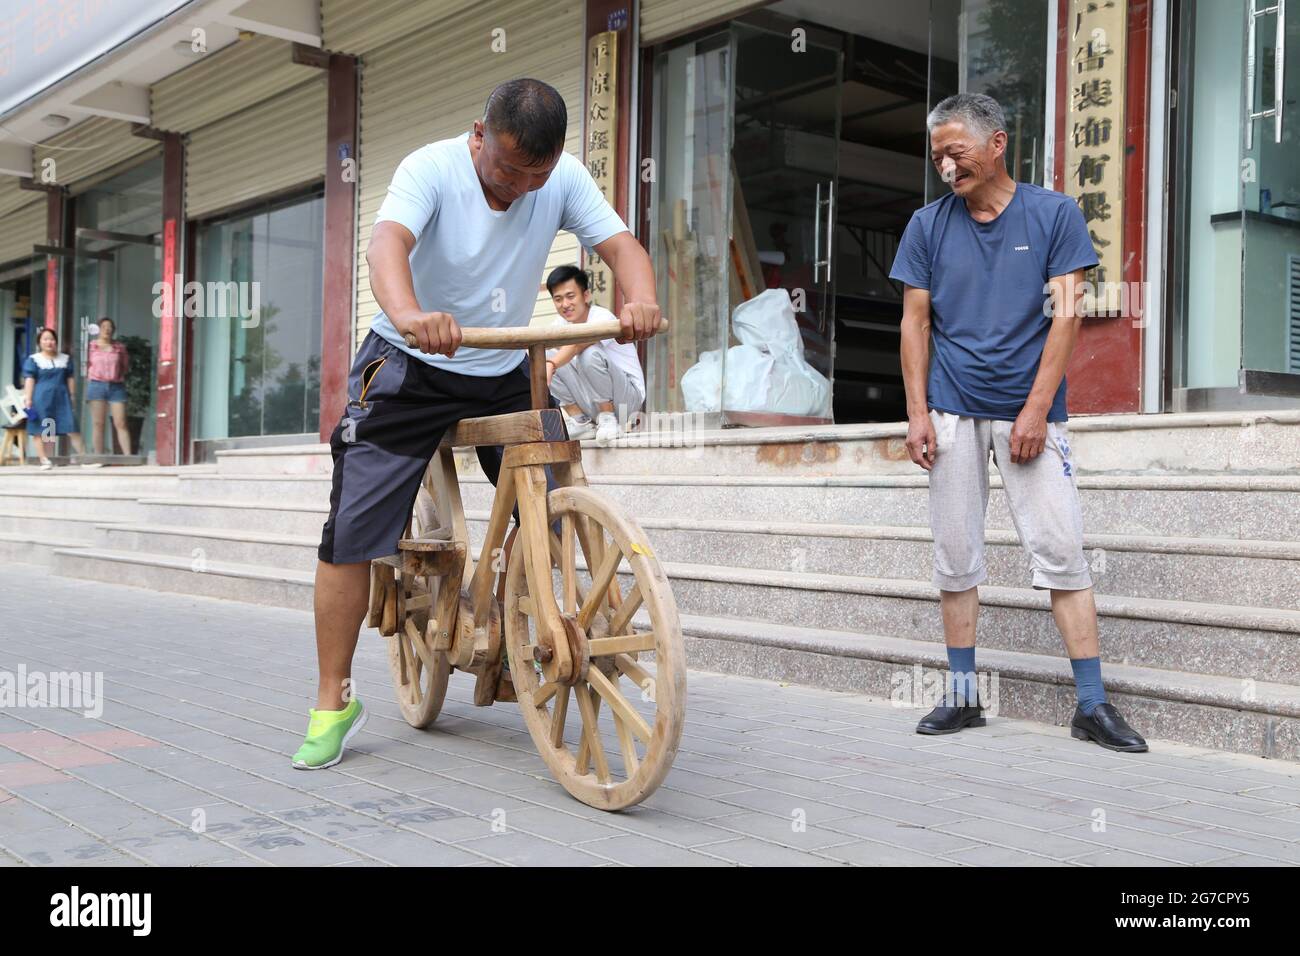 Pingliang, Pingliang, China. 13th July, 2021. On July 12, 2021, in Kongtong District, Pingliang City, Gansu Province, He Yong is demonstrating his pure wooden bicycle. He Yong, 58, from Kongtong District, Pingliang City, Gansu Province, became a household celebrity for his invention of the wooden bicycle. It took him more than a month from drawing pictures to finished products. He made wooden bicycles of more than 40 kilograms from waste walnut wood. The bicycles did not use a single nail, and were all linked by wood. You can watch and ride. According to He Yong, he rode home from Ko Stock Photo